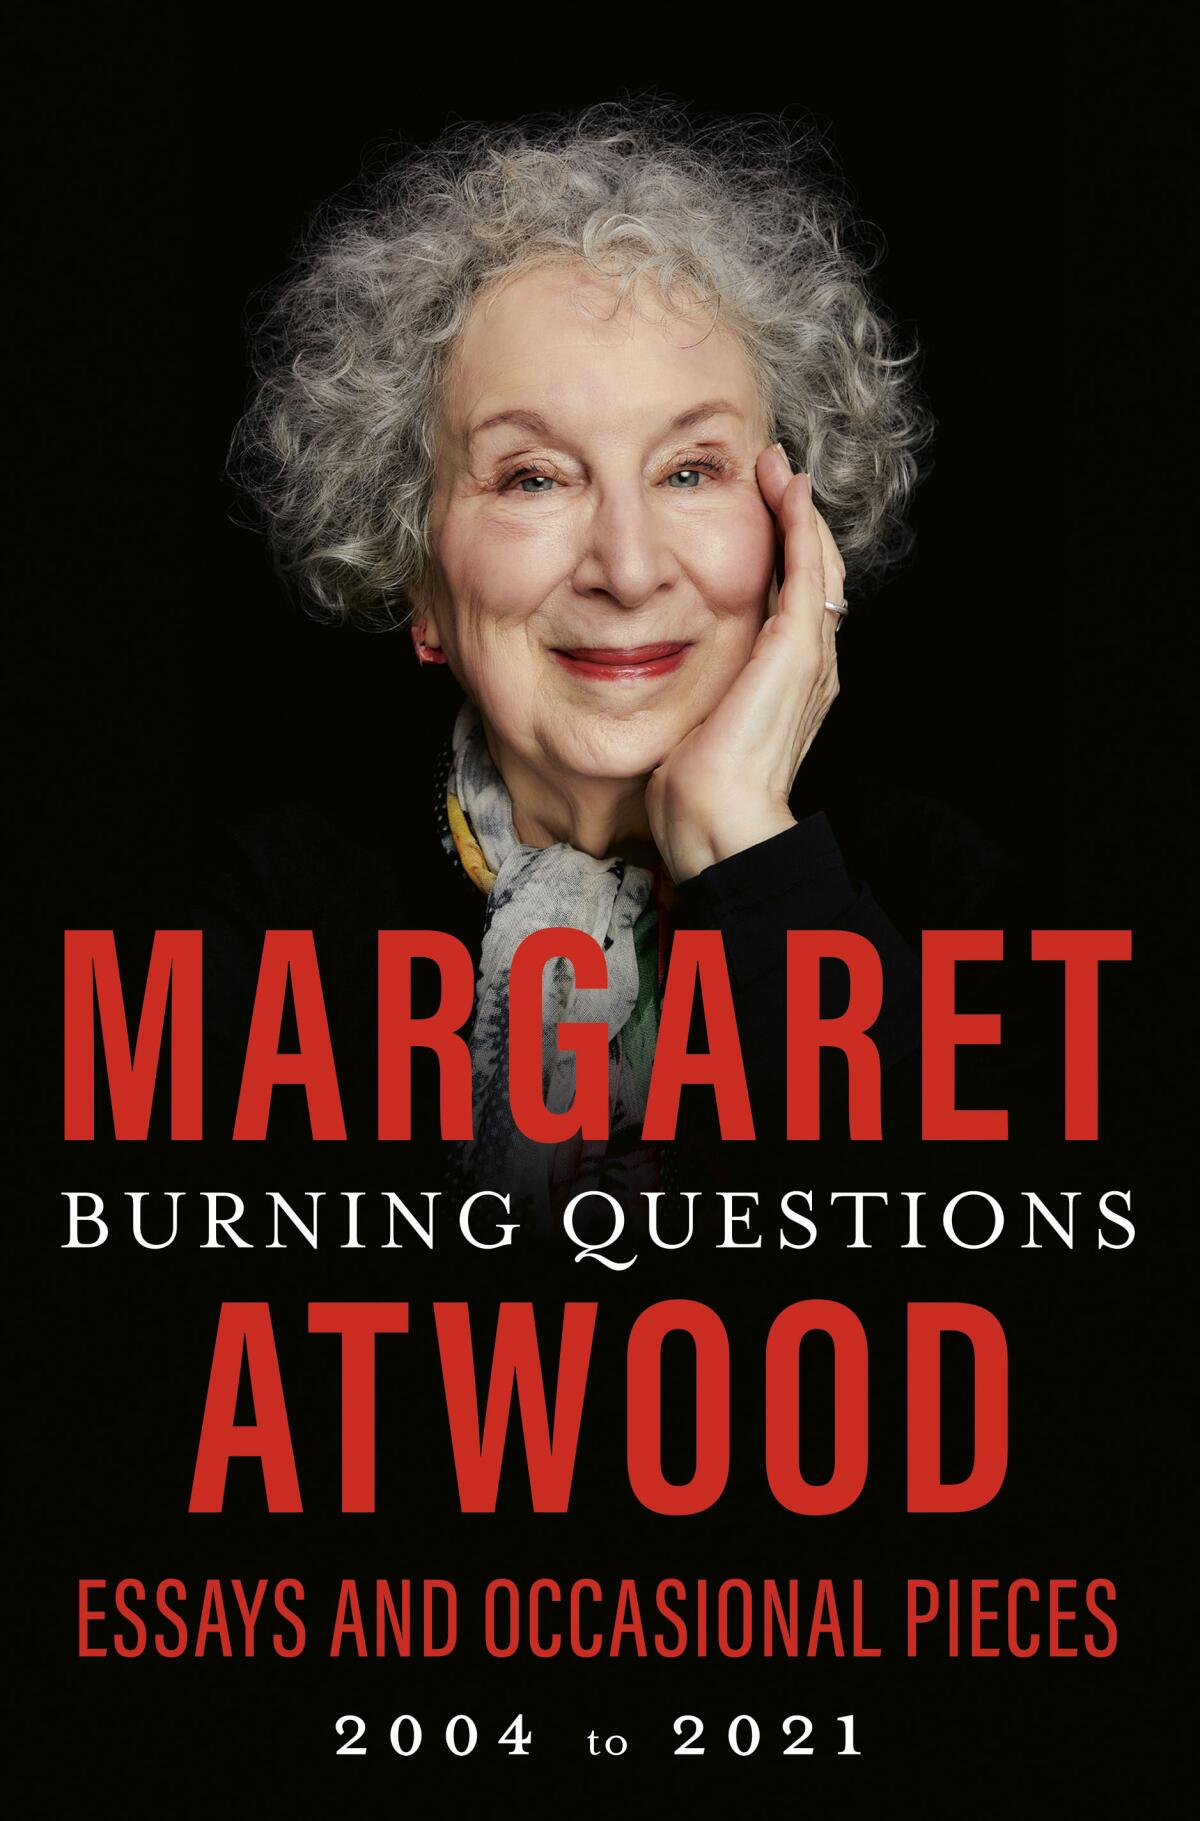 "Burning Questions," by Margaret Atwood